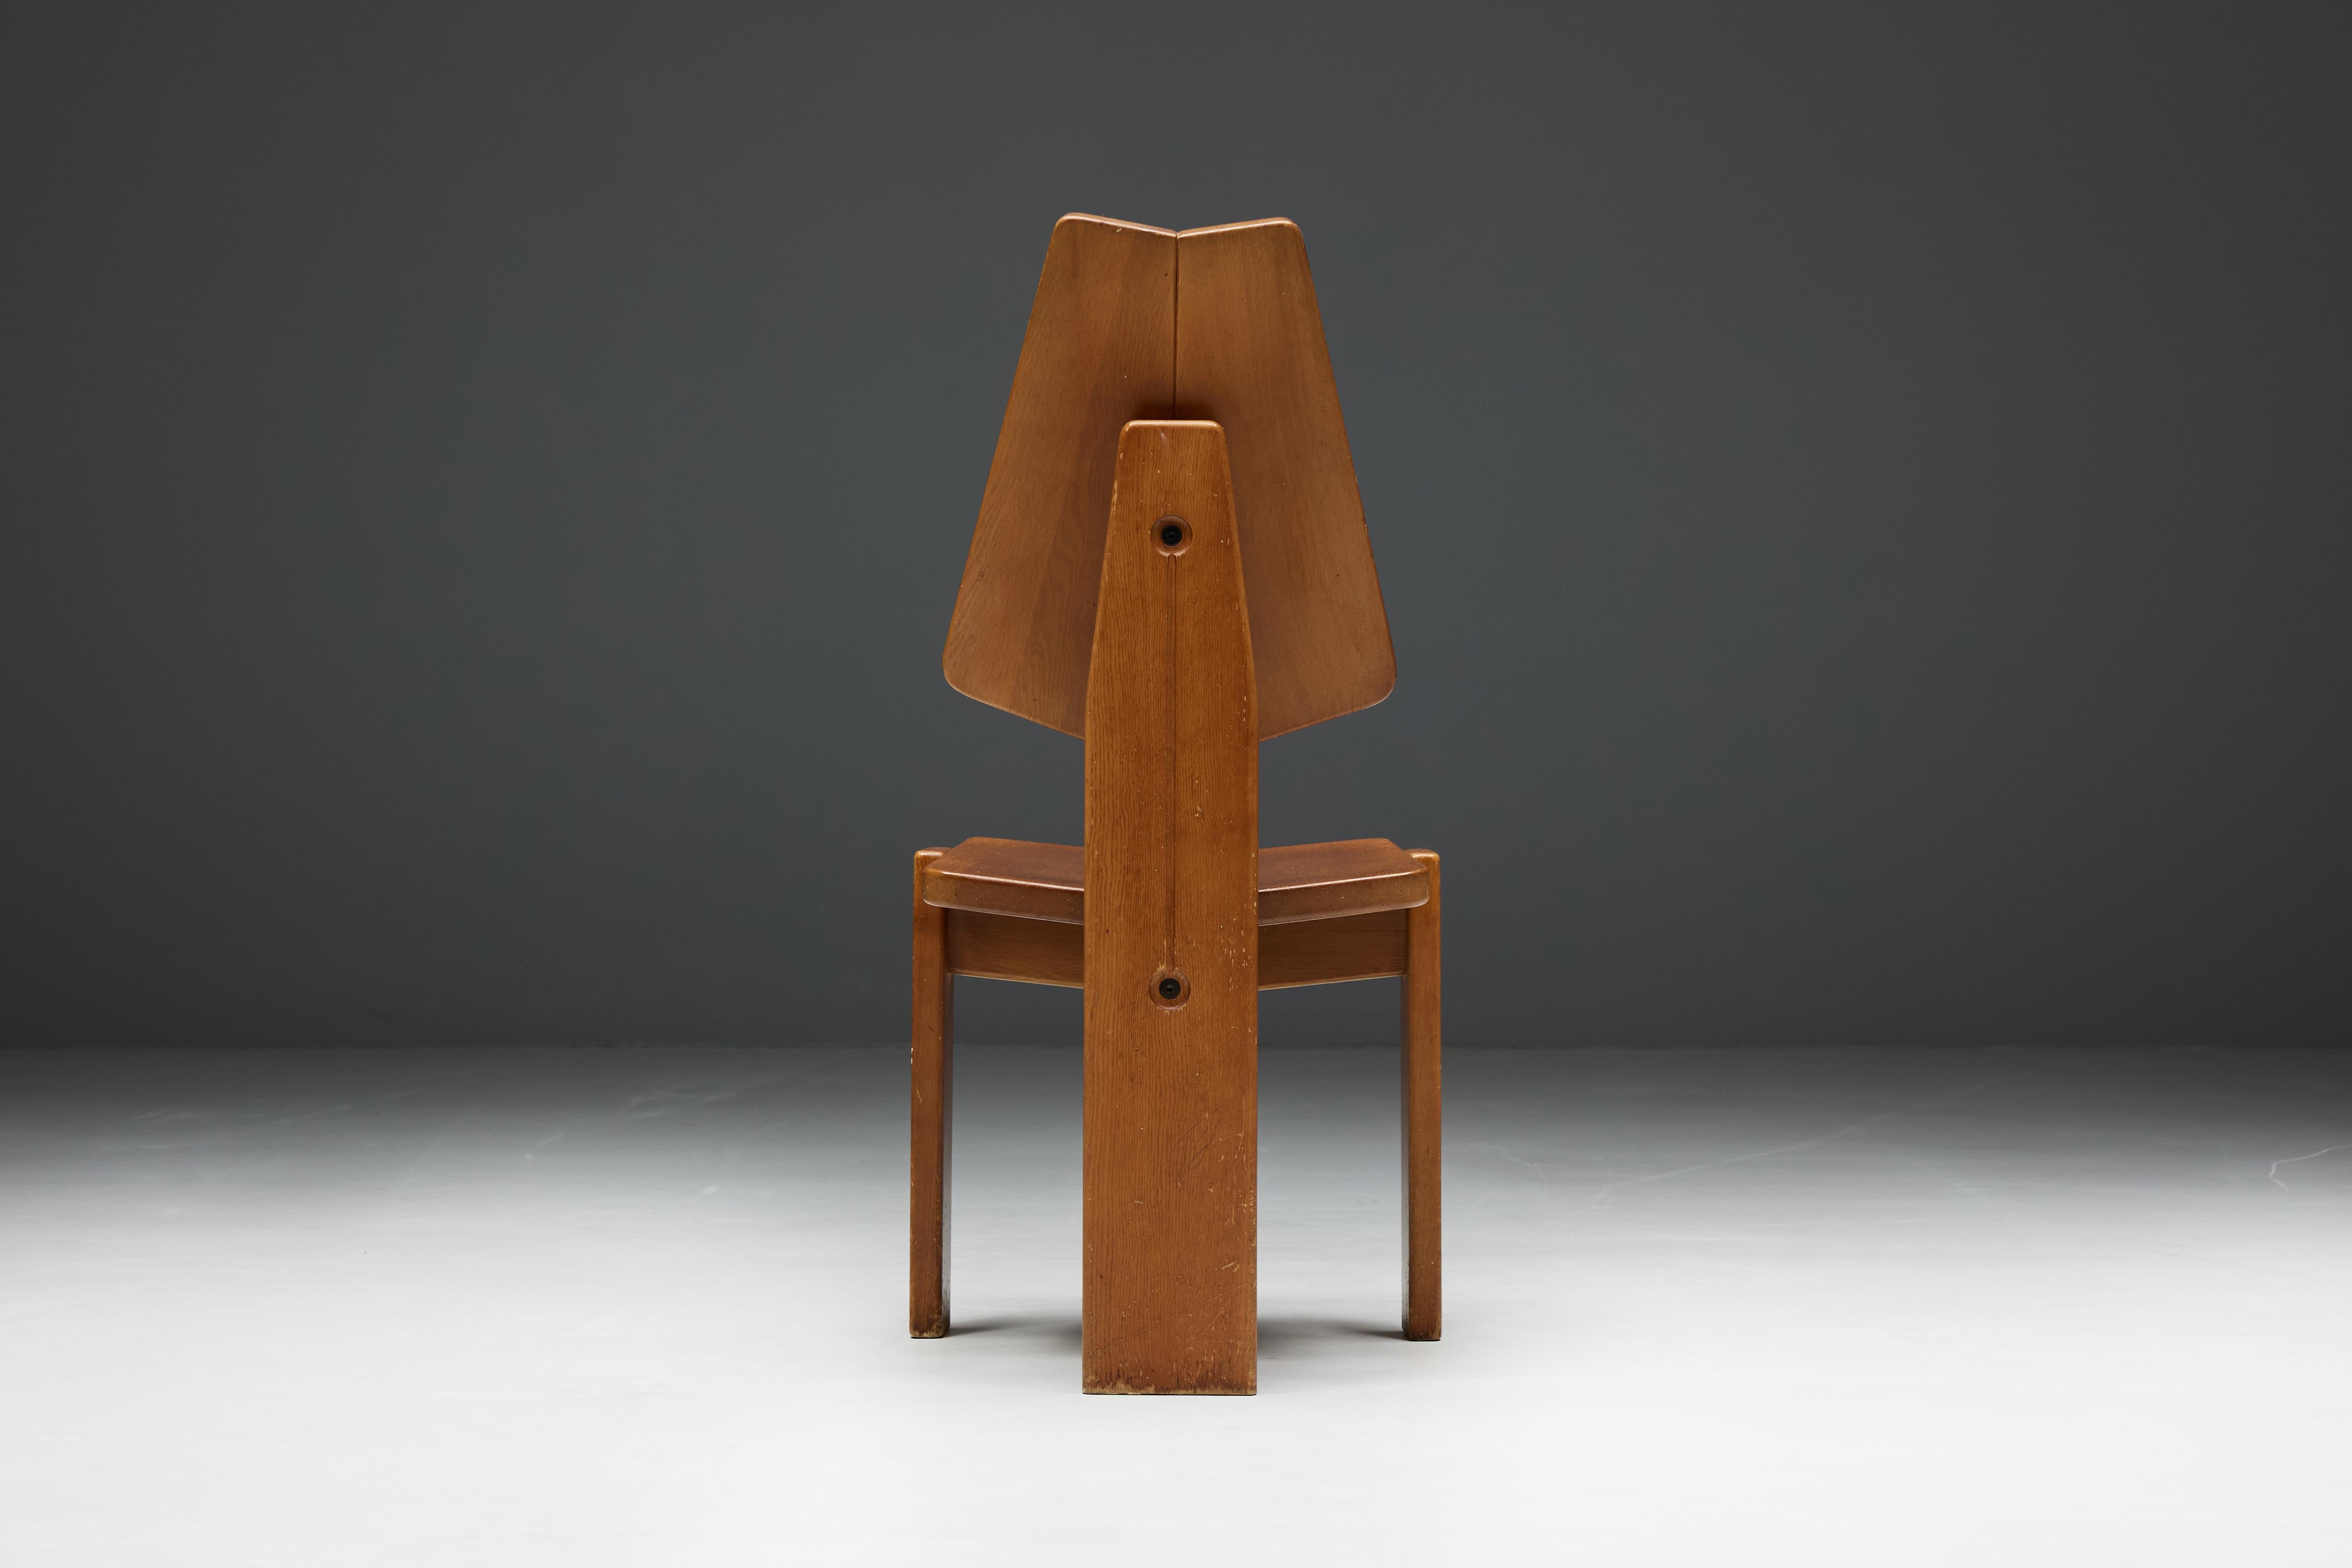 Brutalist Wooden Dining Chairs, Belgium, 1970s For Sale 8